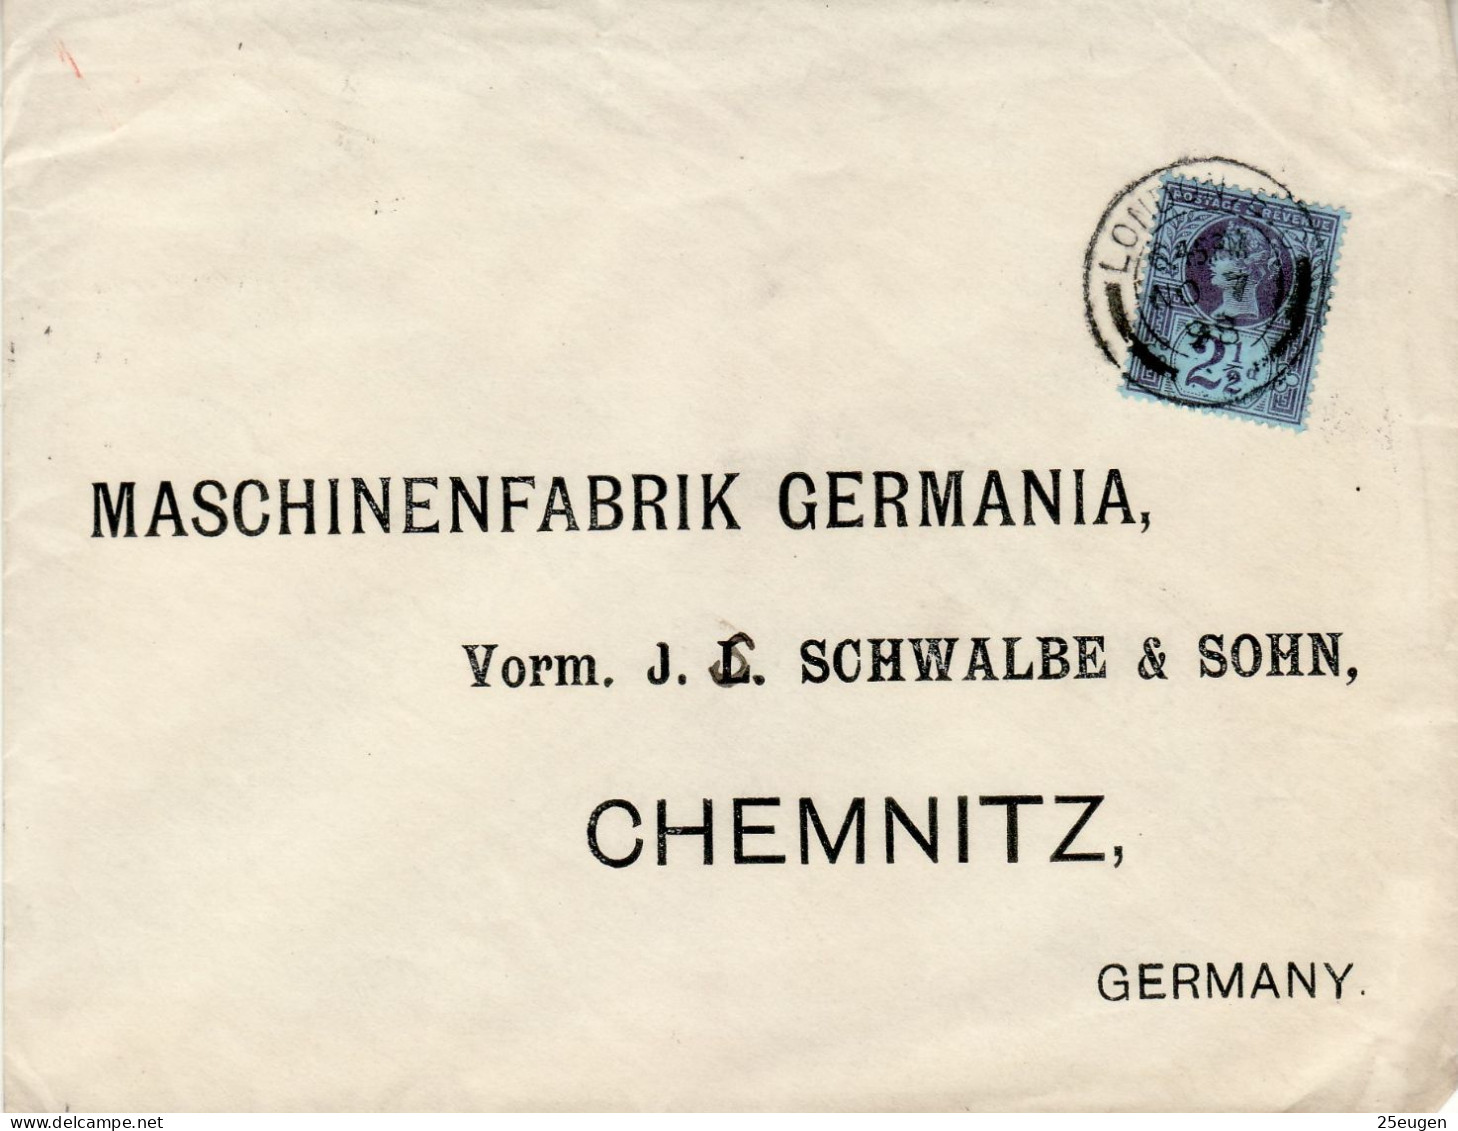 GREAT BRITAIN 1898 LETTER SENT FROM LONDON TO CHEMNITZ - Covers & Documents